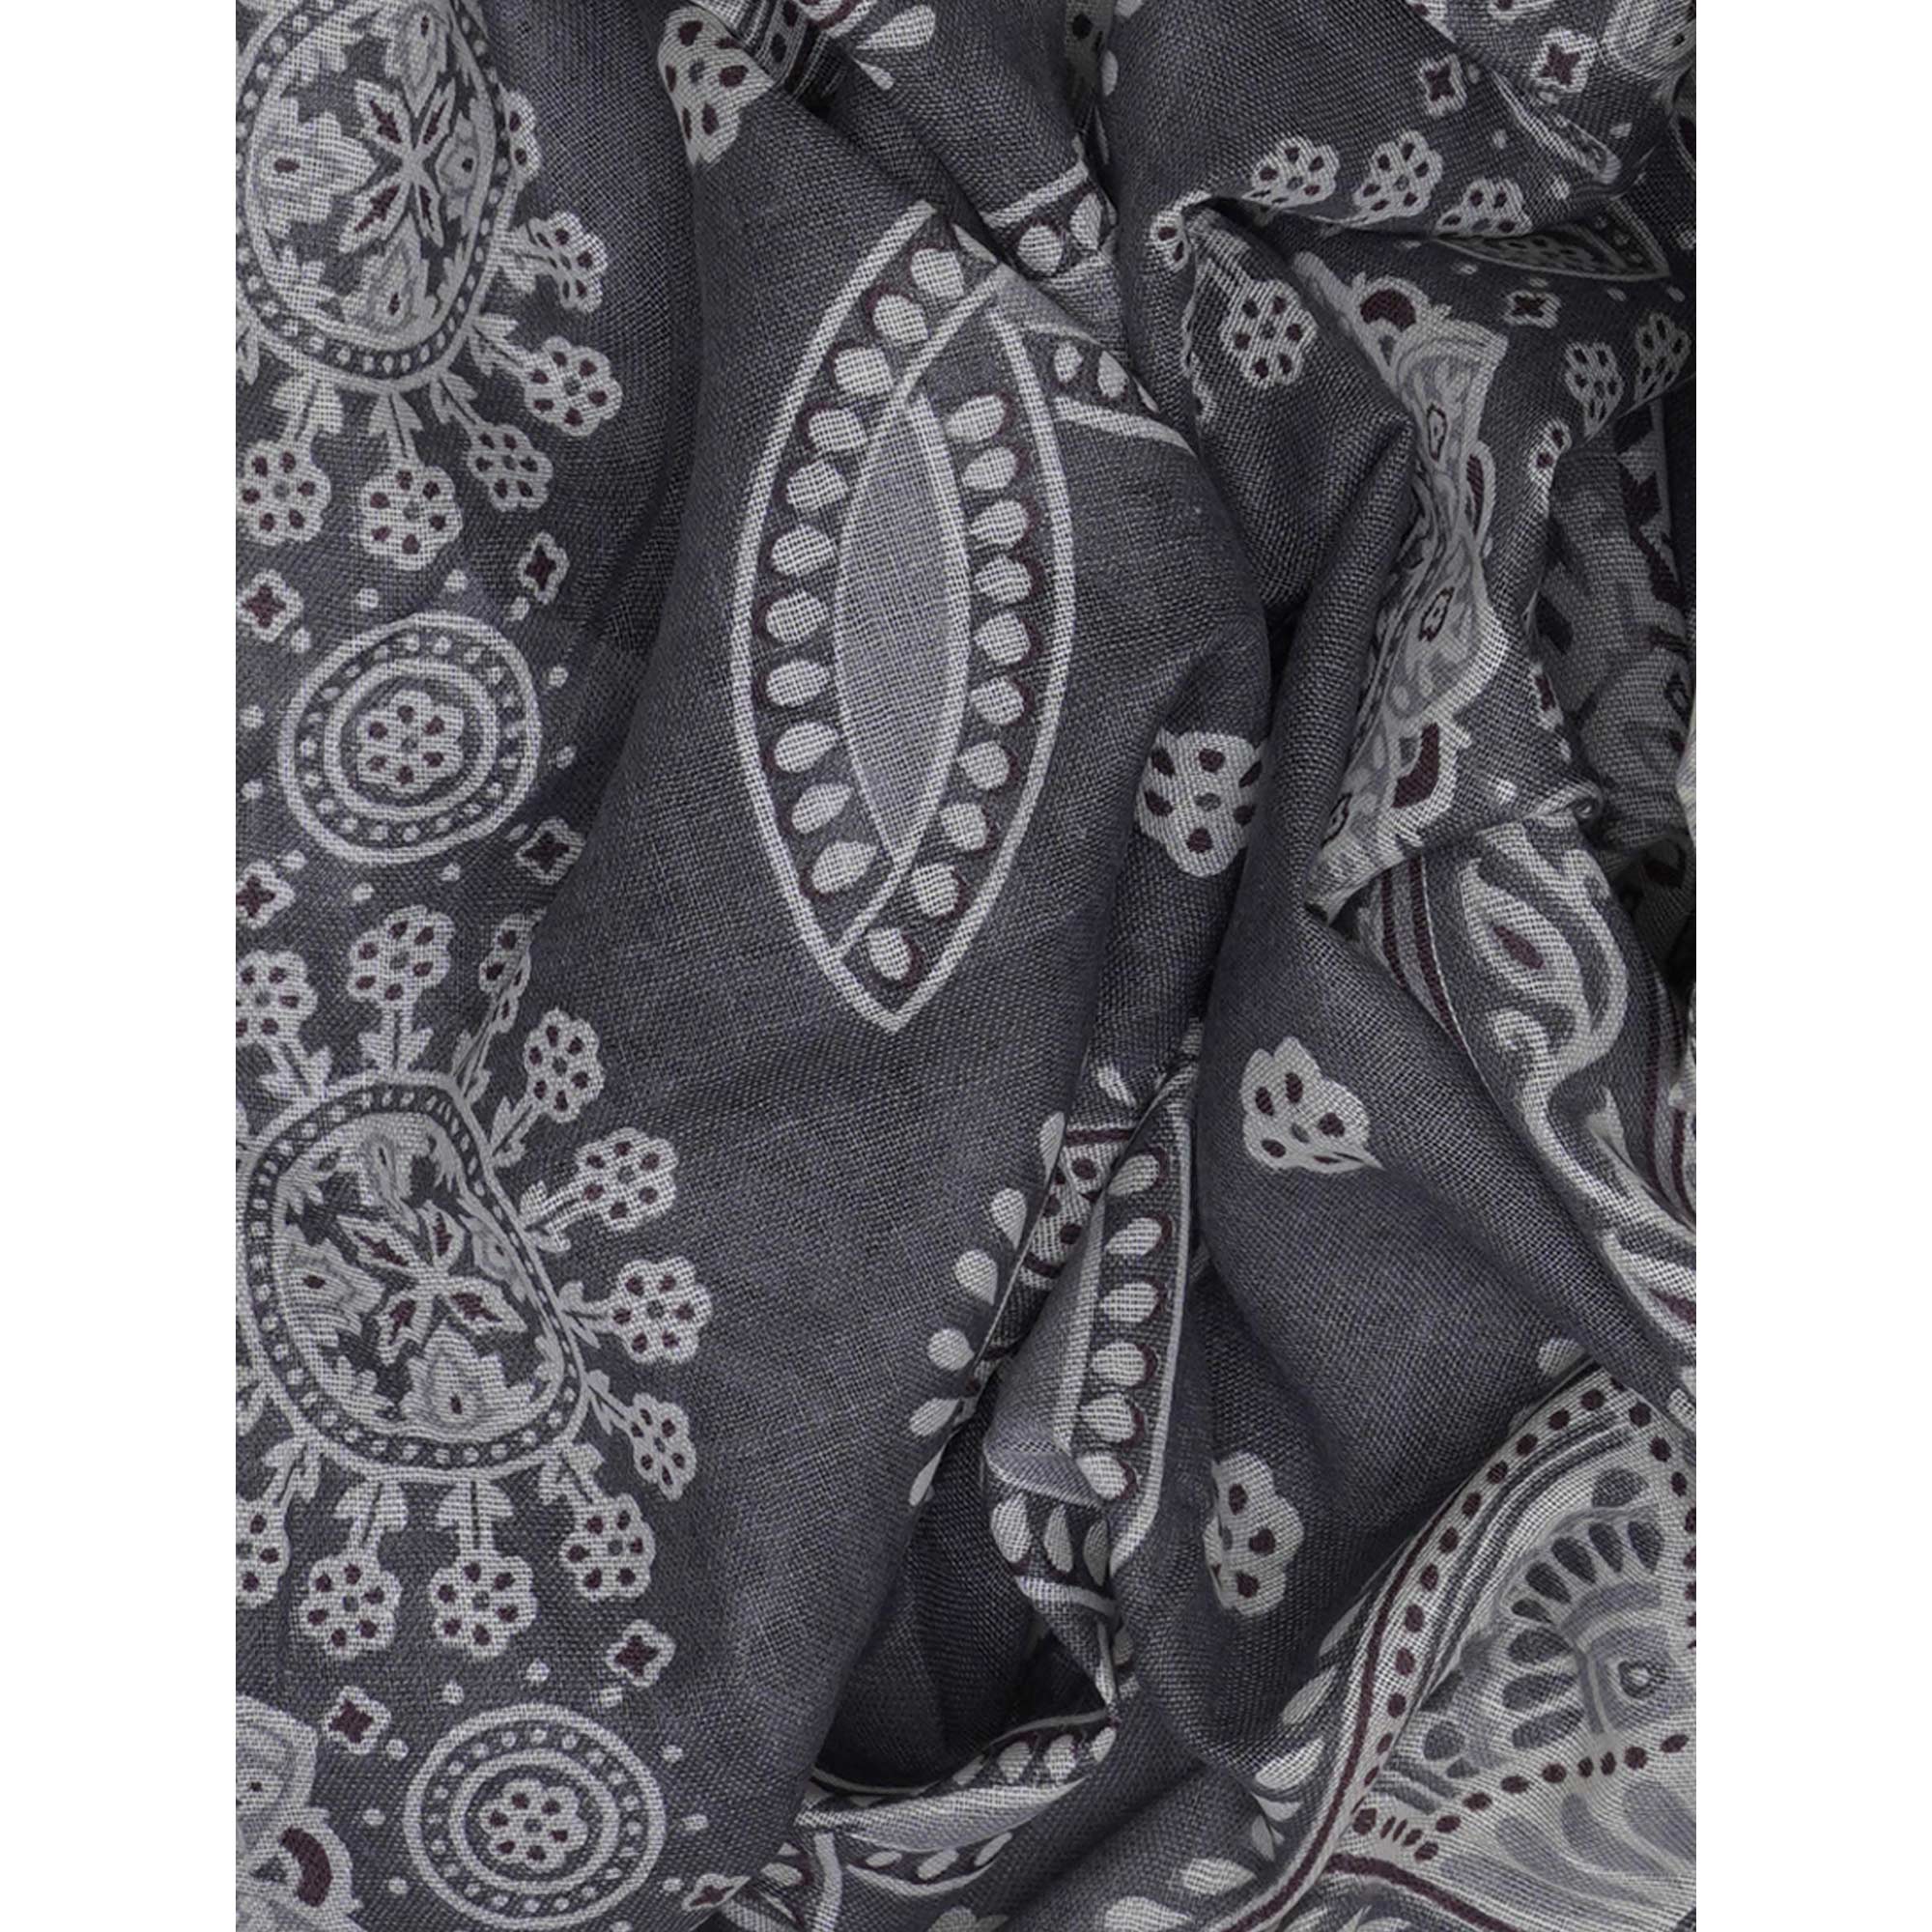 Grey Floral Printed Cotton Blend Dress Material